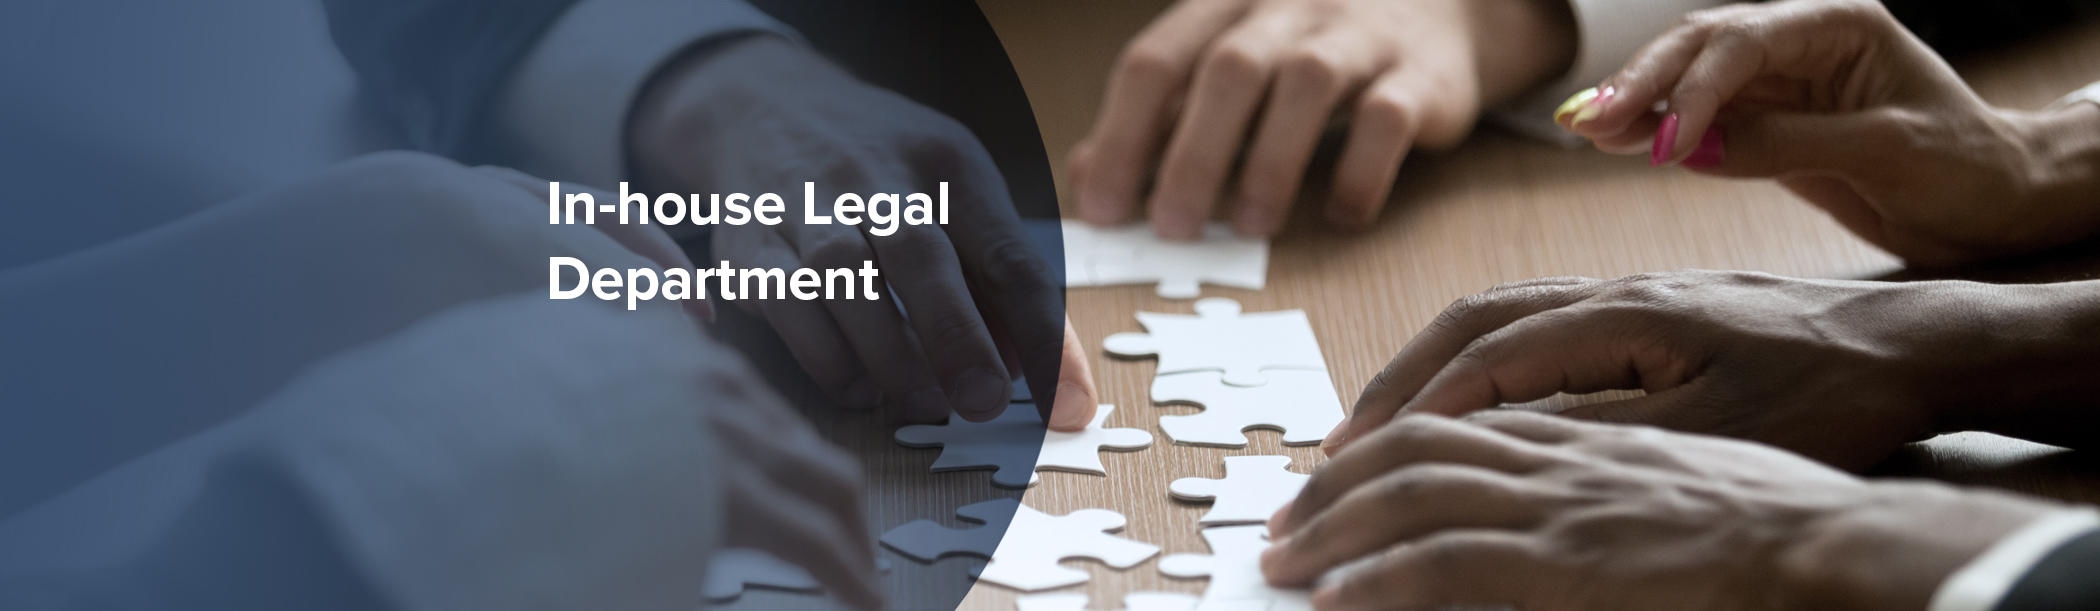 In-house Legal Departments